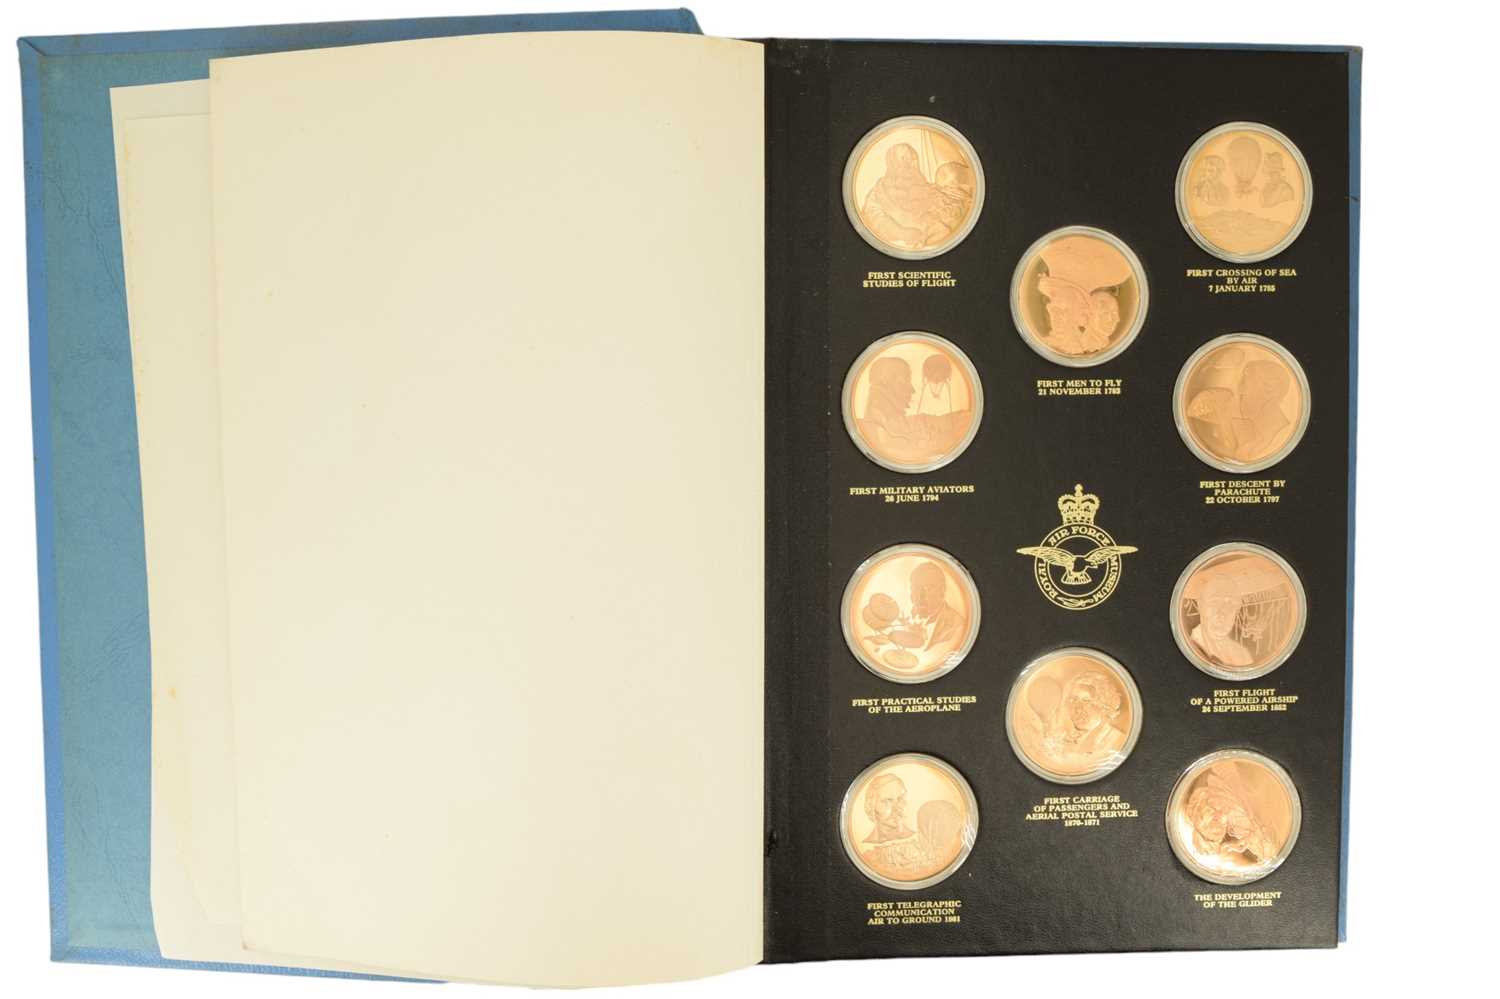 The History of Man in Flight bronze medal album for The Royal Airforce Museum by Franklin Mint Ltd - Image 6 of 15